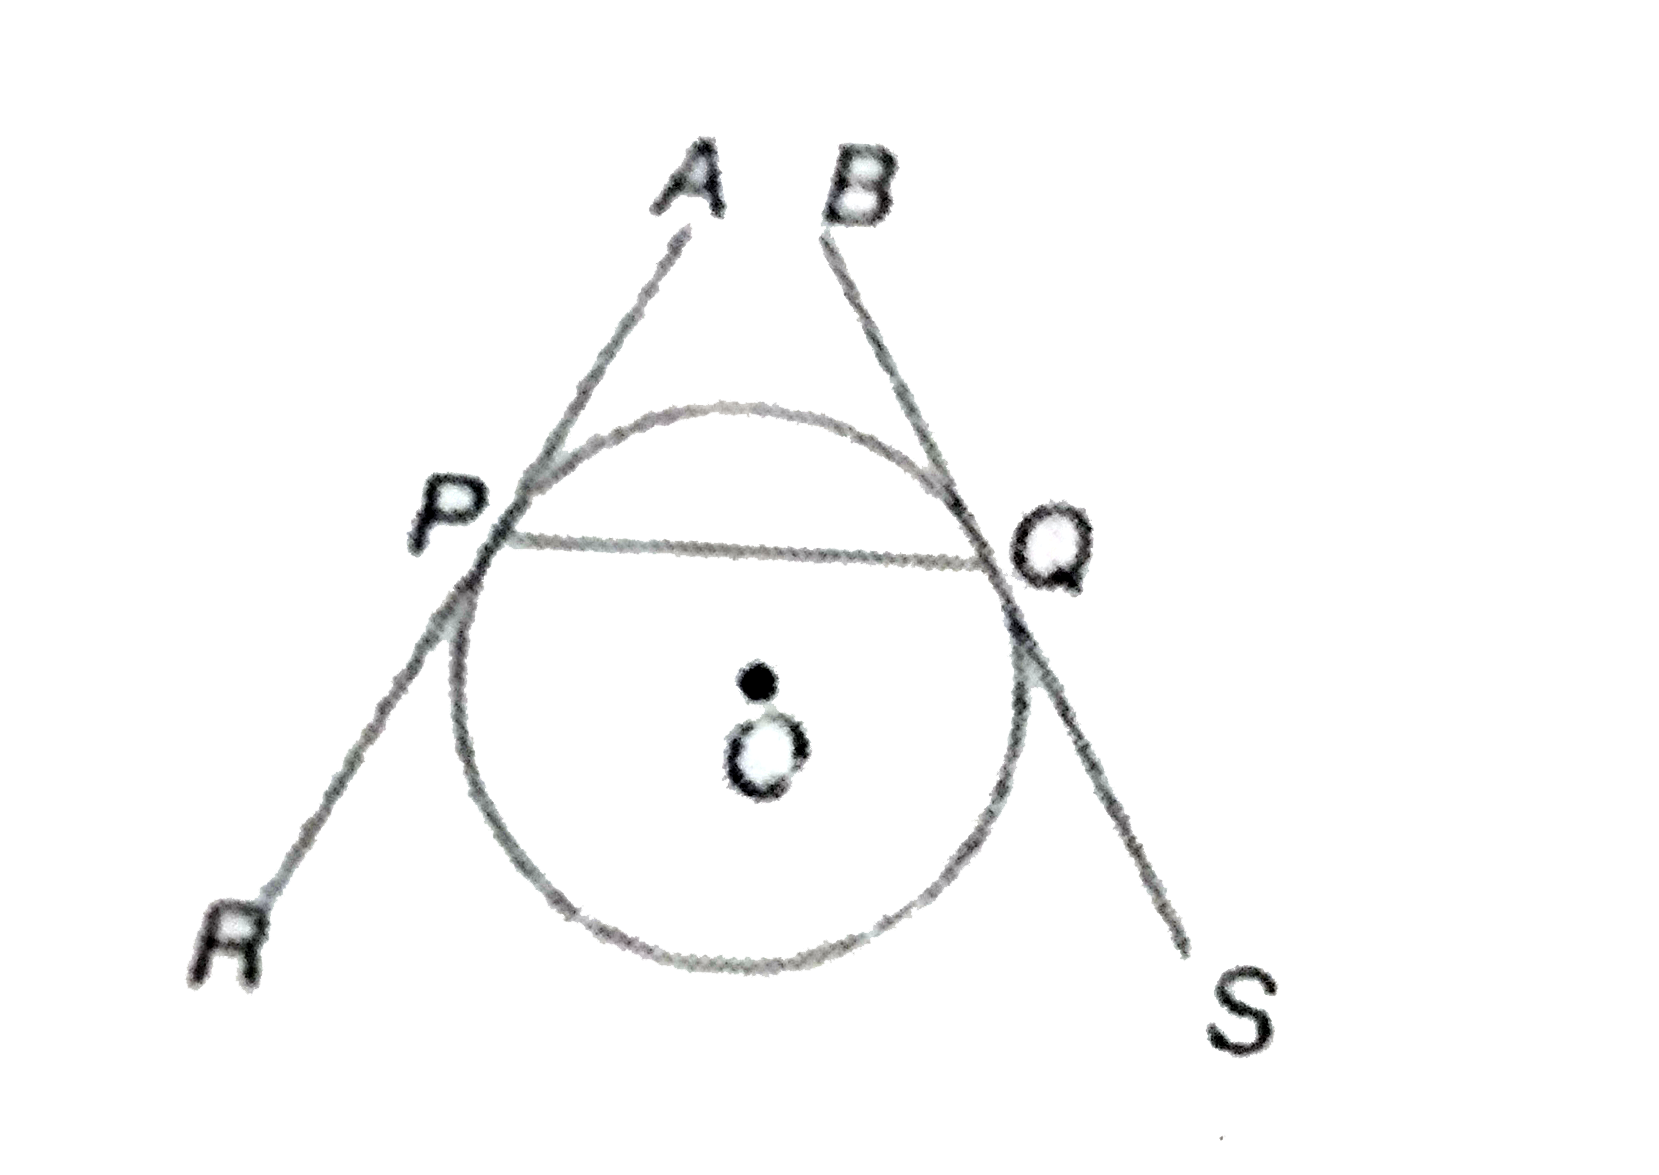 Ar and BS are the tangents to the circle, with centre O, touching at P and Q respectively and PQ is the chord. If angle OQP=24^@, then angle RPQ= .